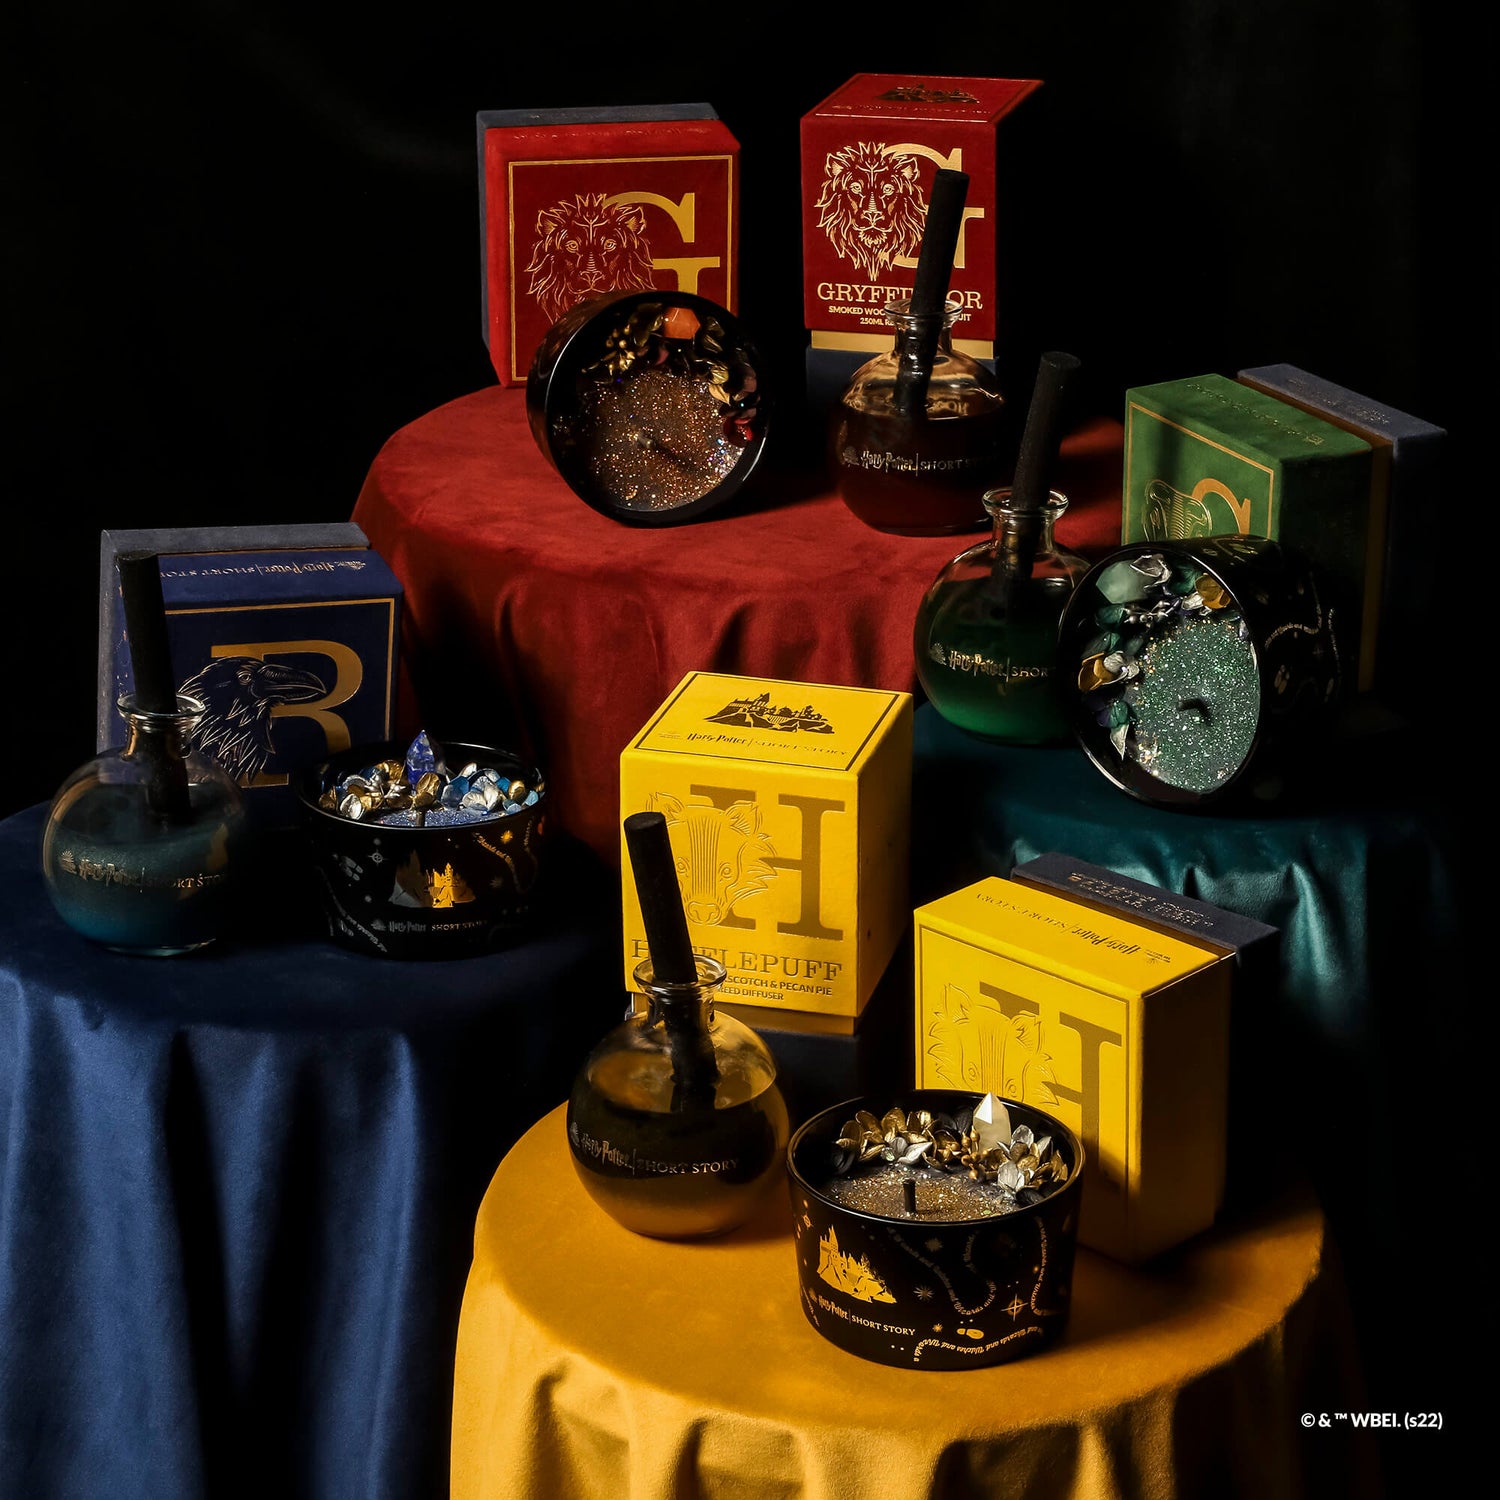 Harry Potter Hufflepuff Collection Pack